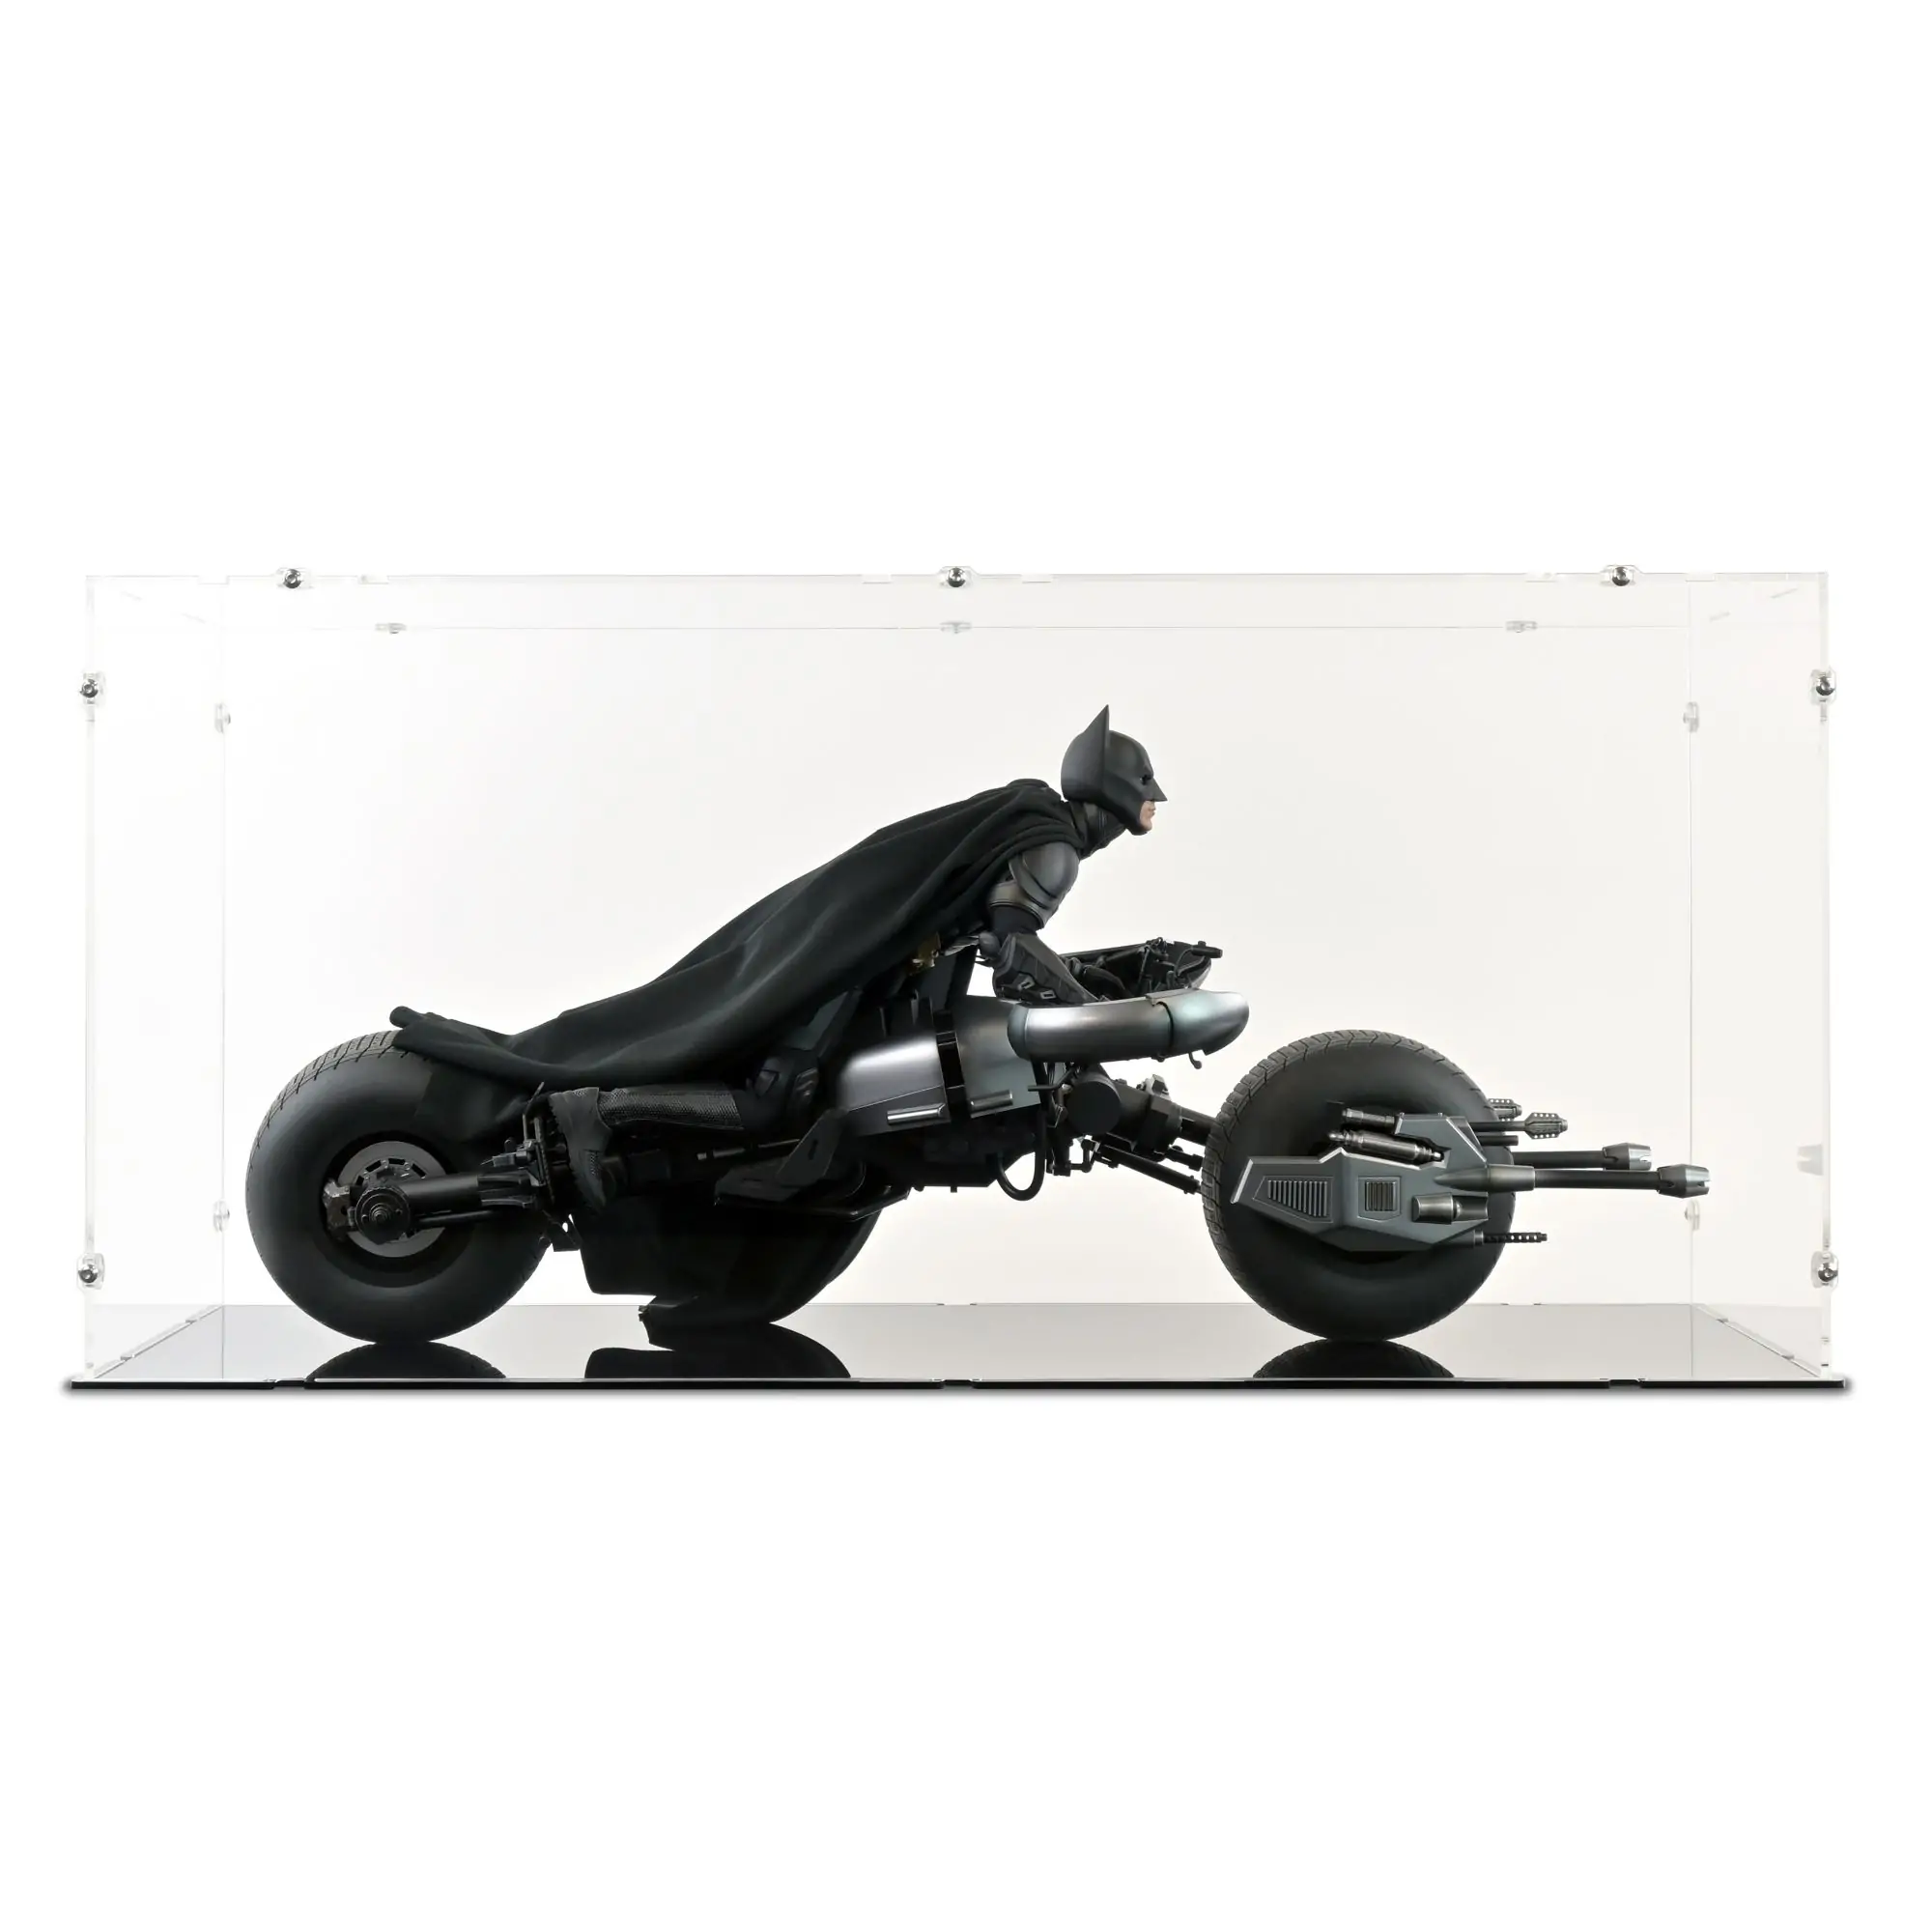 Dark Knight Rises Batpod motorcycle - Return of the Cafe Racers